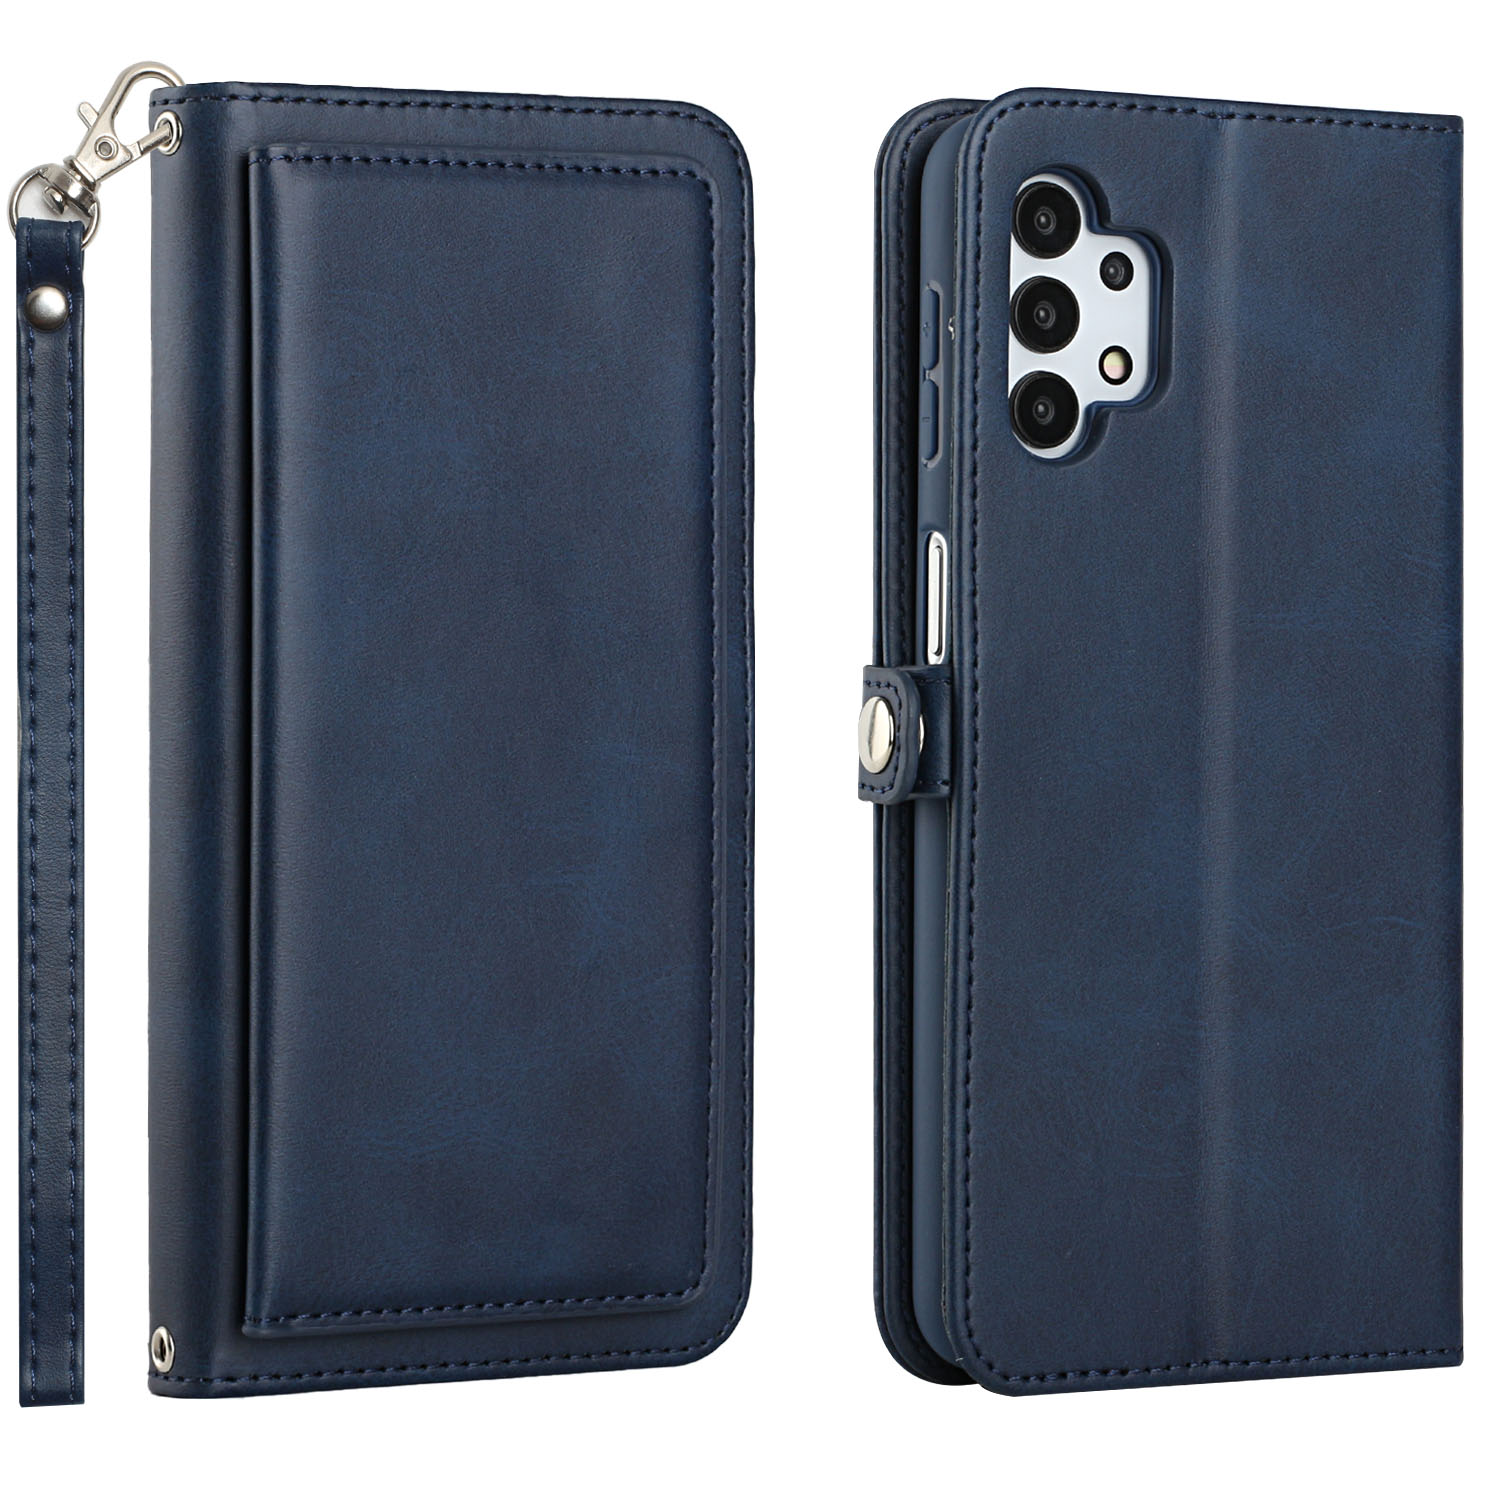 Premium PU Leather Folio WALLET Front Cover Case for Galaxy A32 5G (Blue)